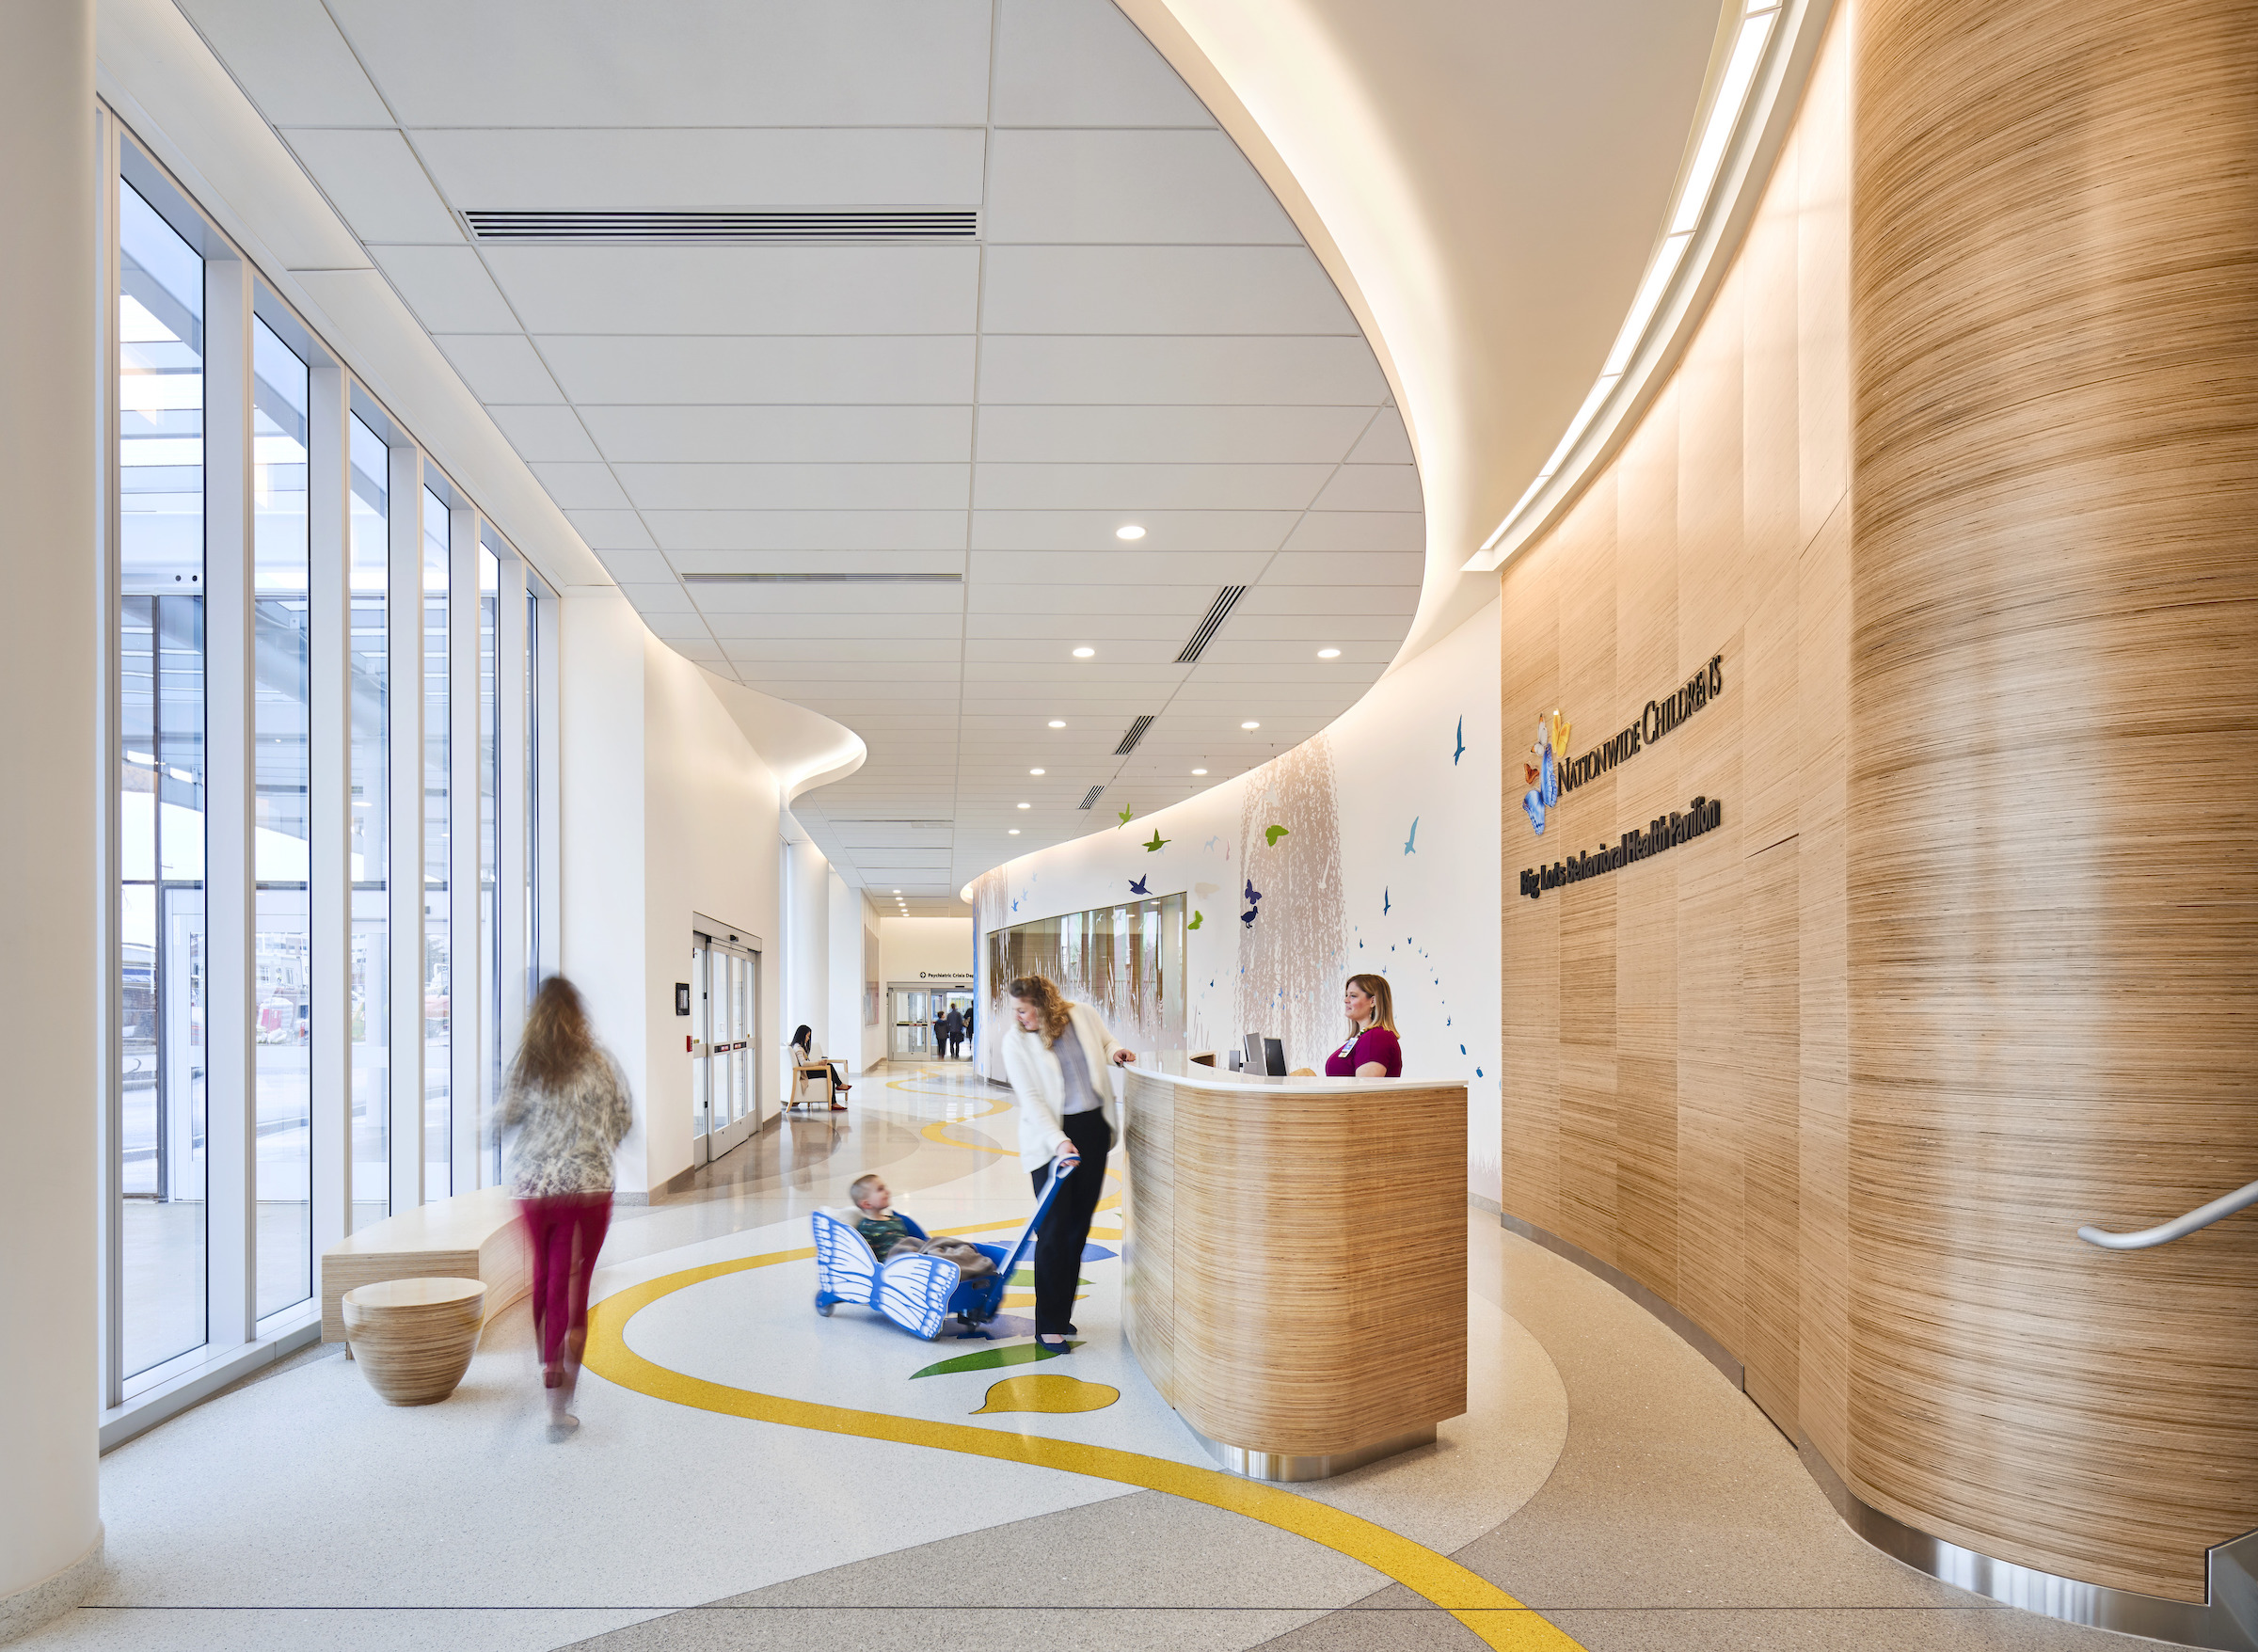 NBBJ kicks off new design podcast with discussion on behavioral health facilities